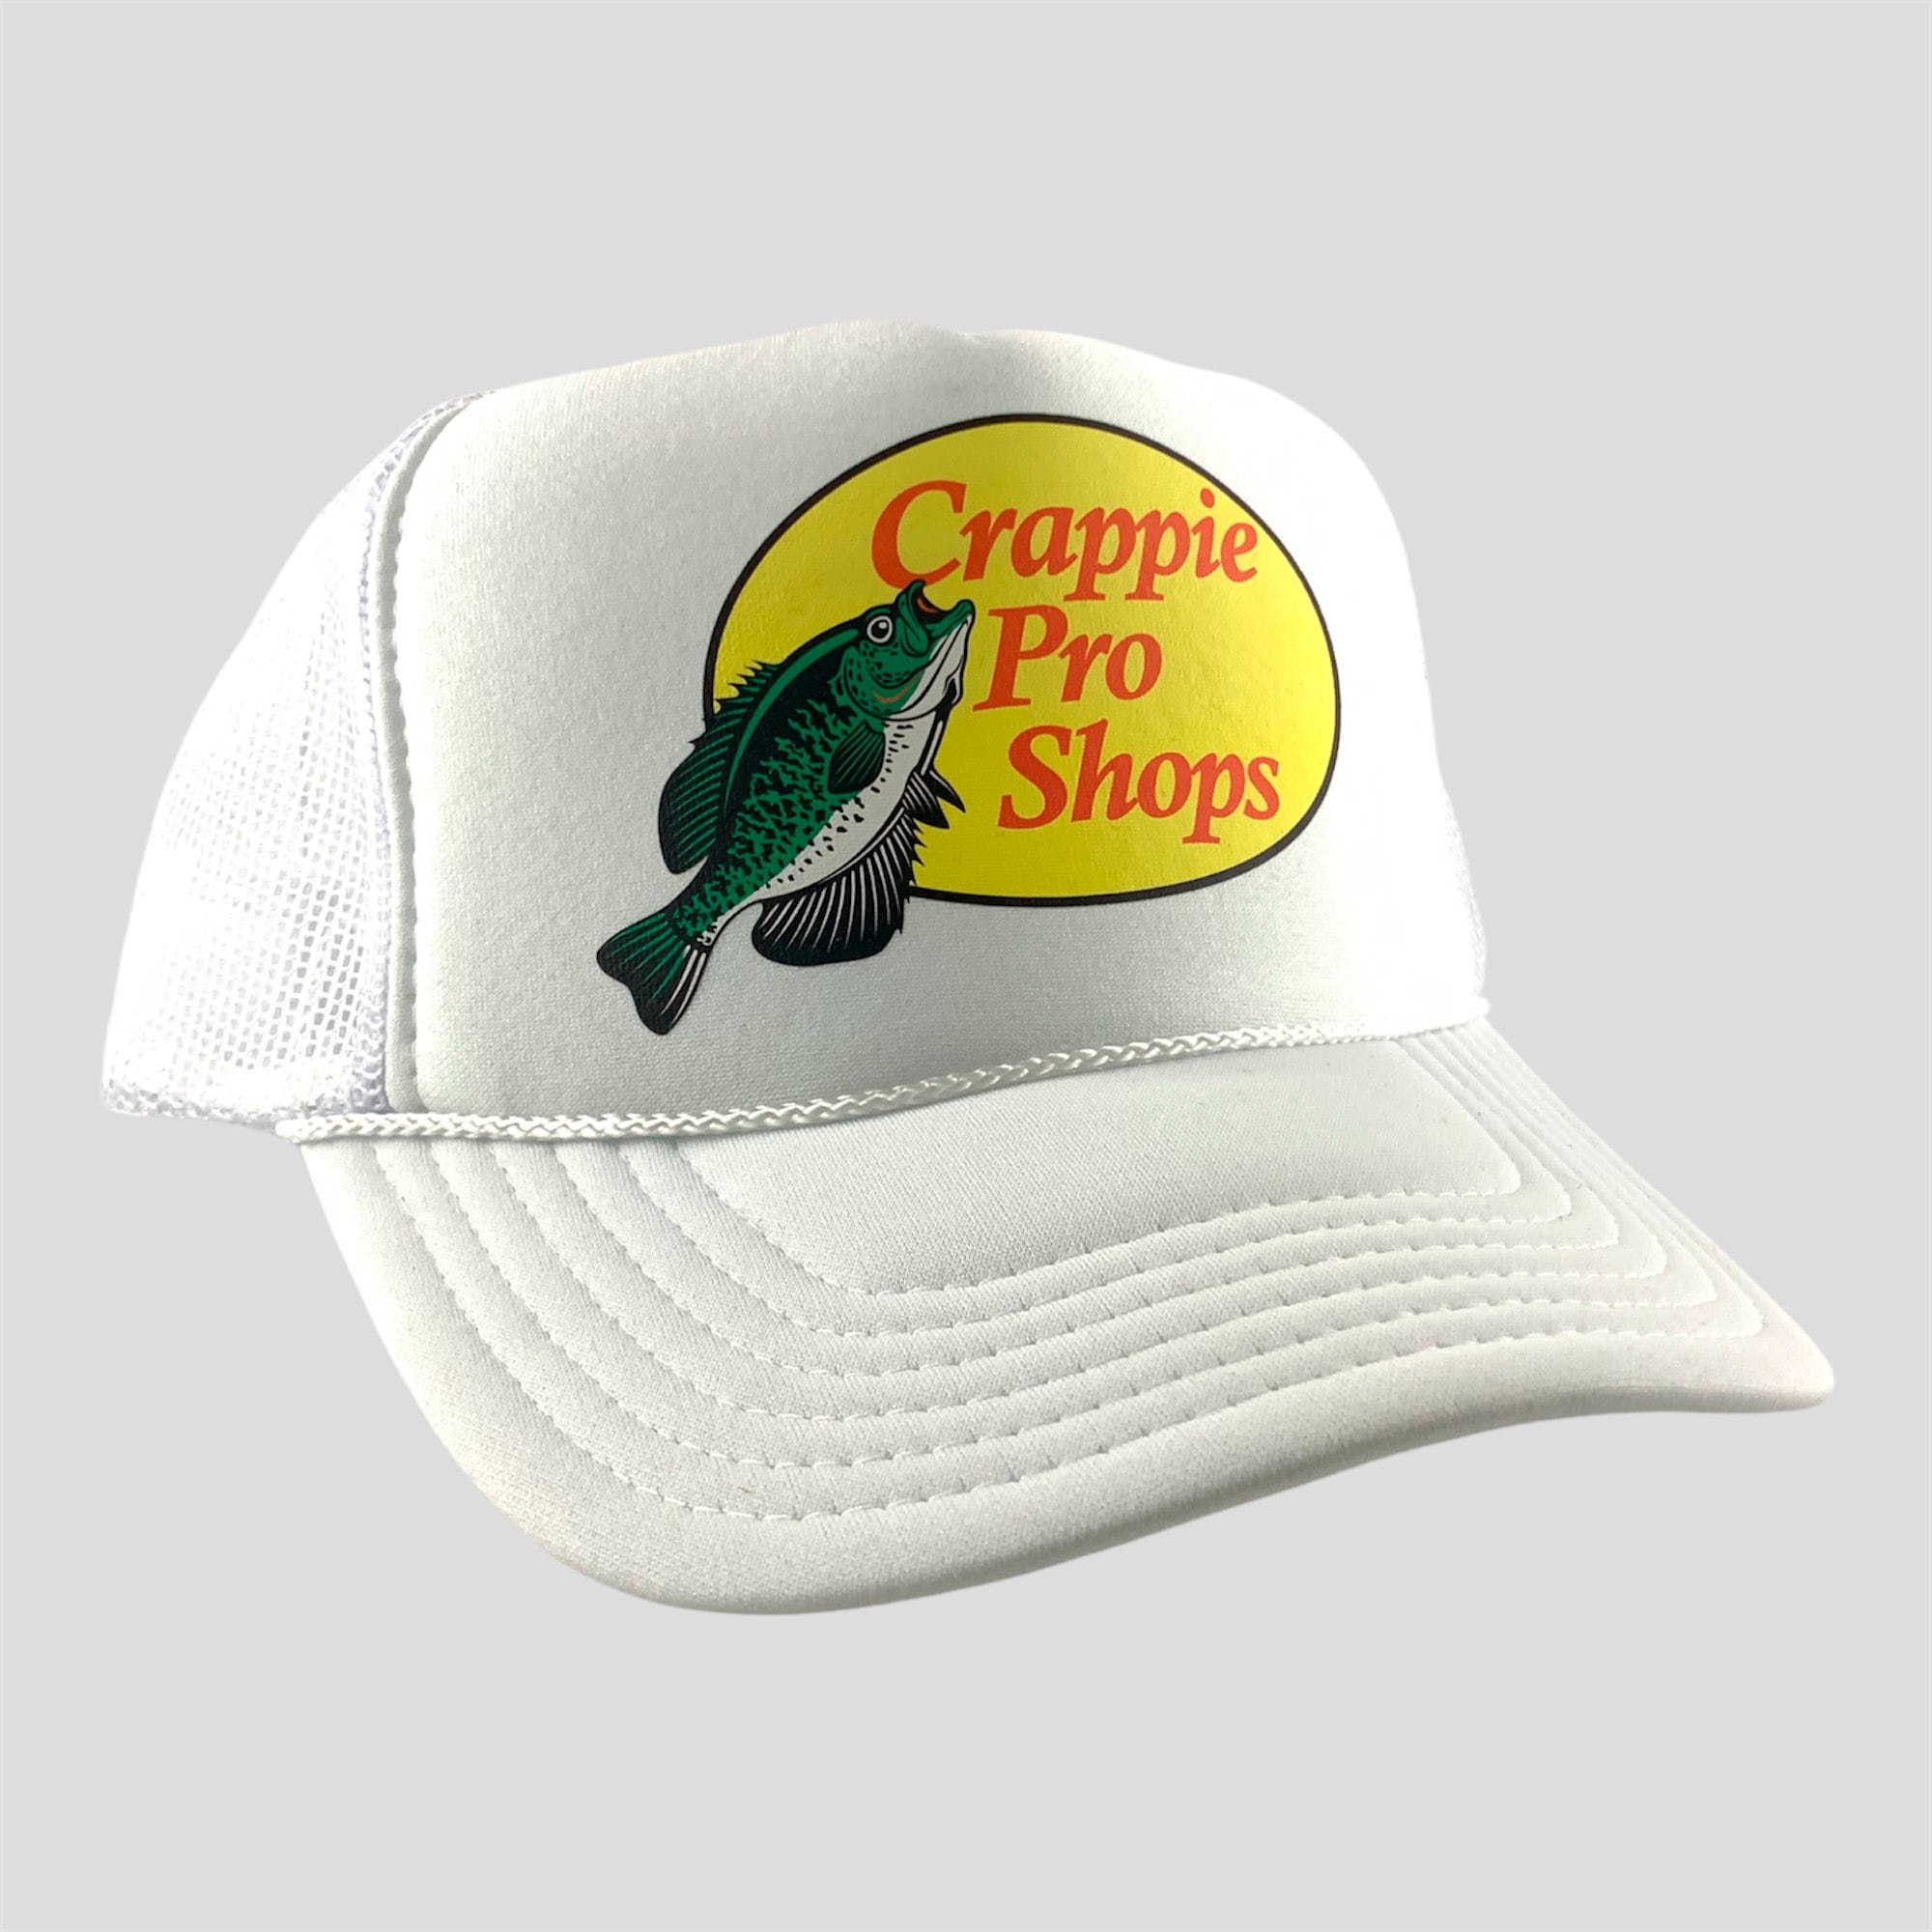 Crappie Pro Shops Hat, Trucker Hat, Fishing Hat, Father Gift, Gift for Him,  Mesh Hat, Cap, Camo Hat, Lake Hat, Father's Day, Dad, Fish Hat 